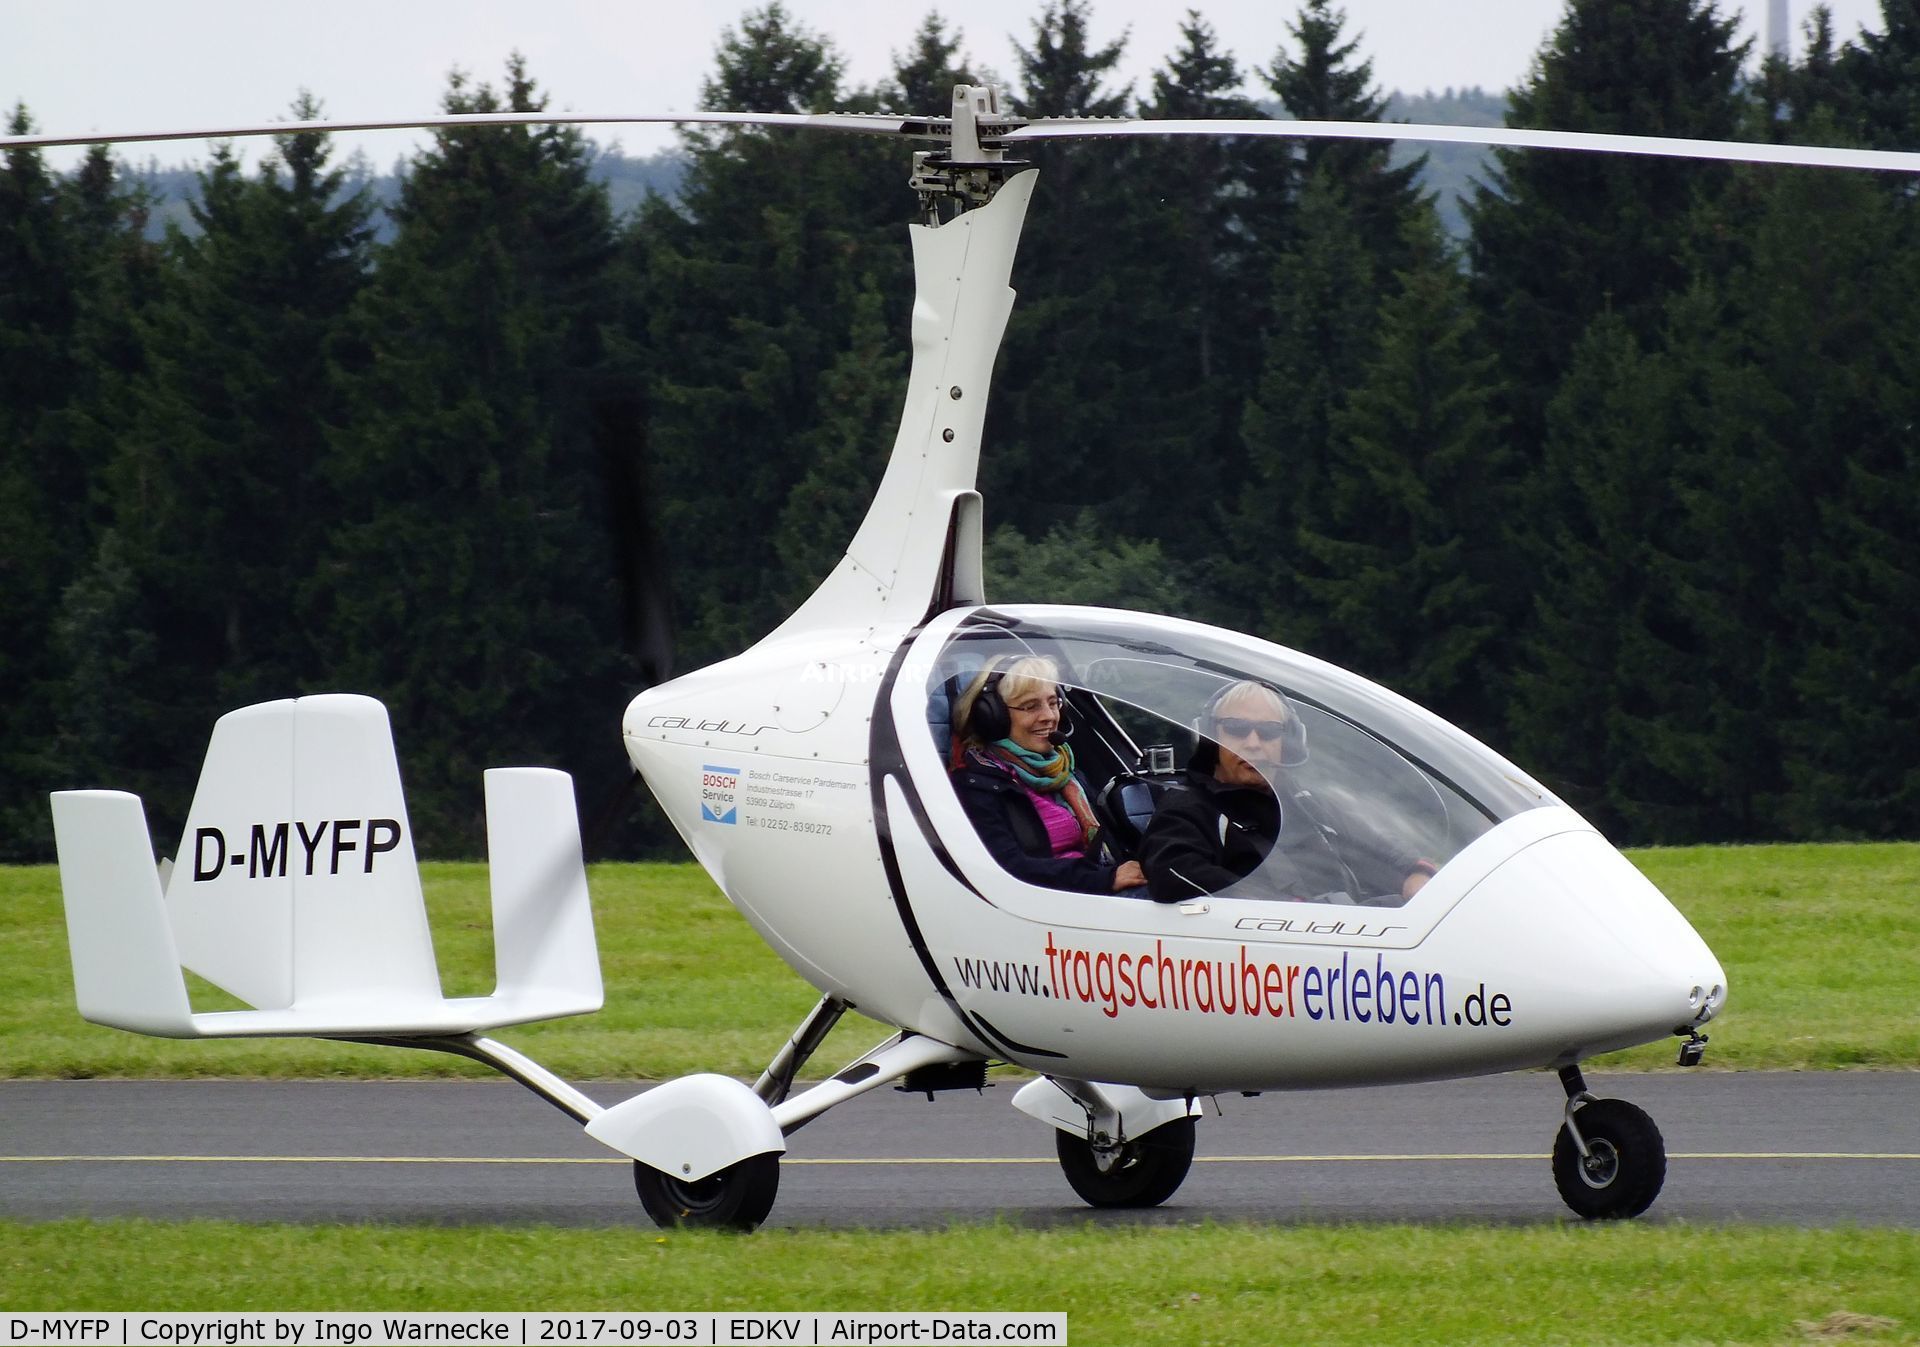 D-MYFP, AutoGyro Calidus C/N not foung D-Myfp, AutoGyro Calidus at the Dahlemer Binz 60th jubilee airfield display